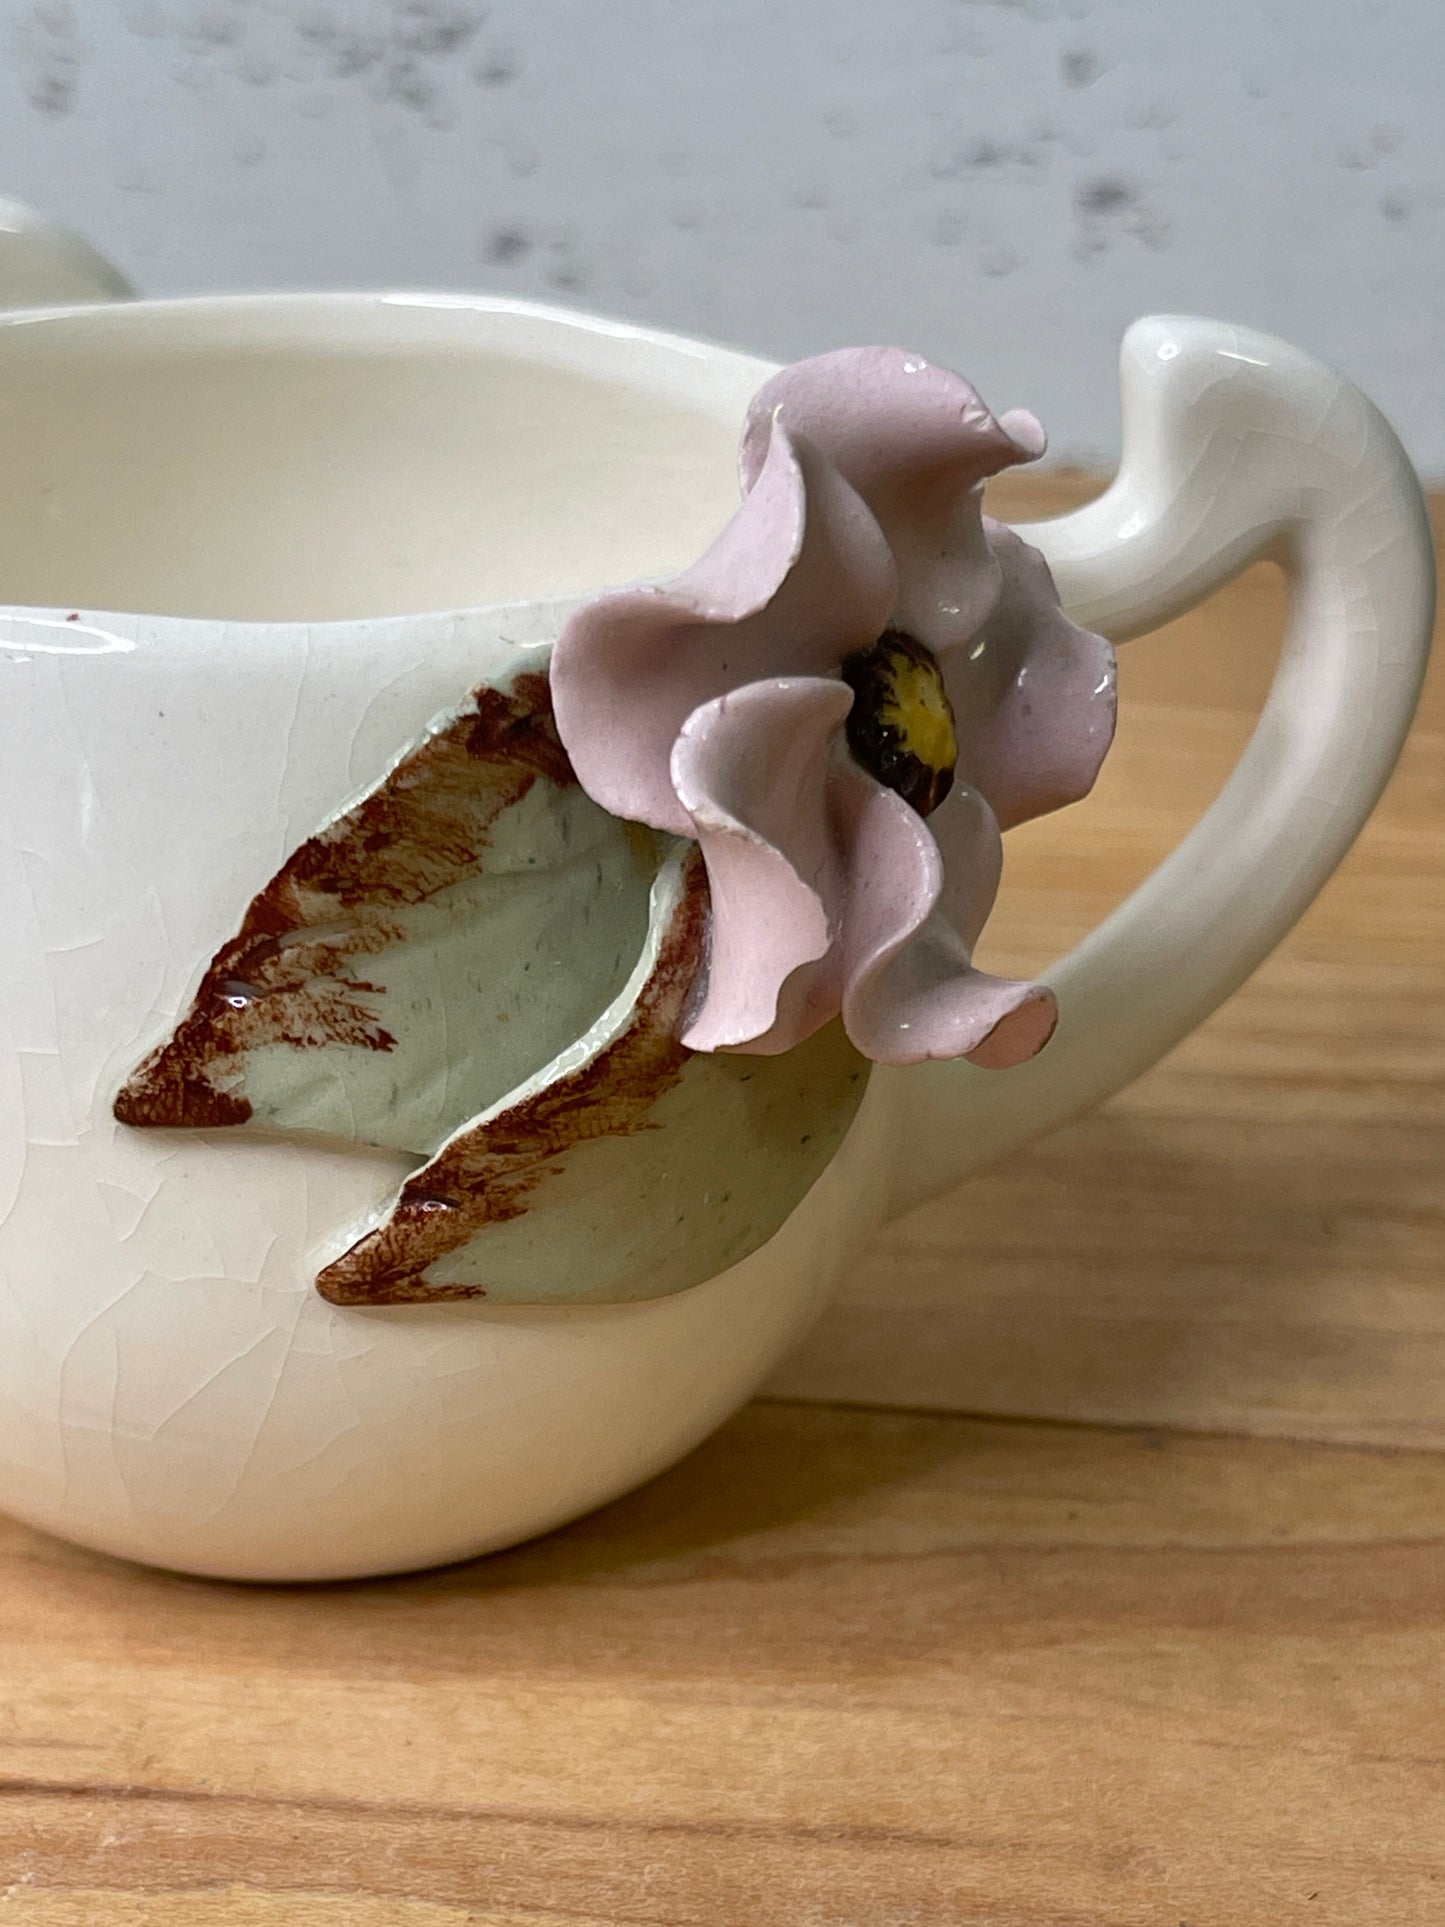 Sugar and Creamer with Magnolia Flowers